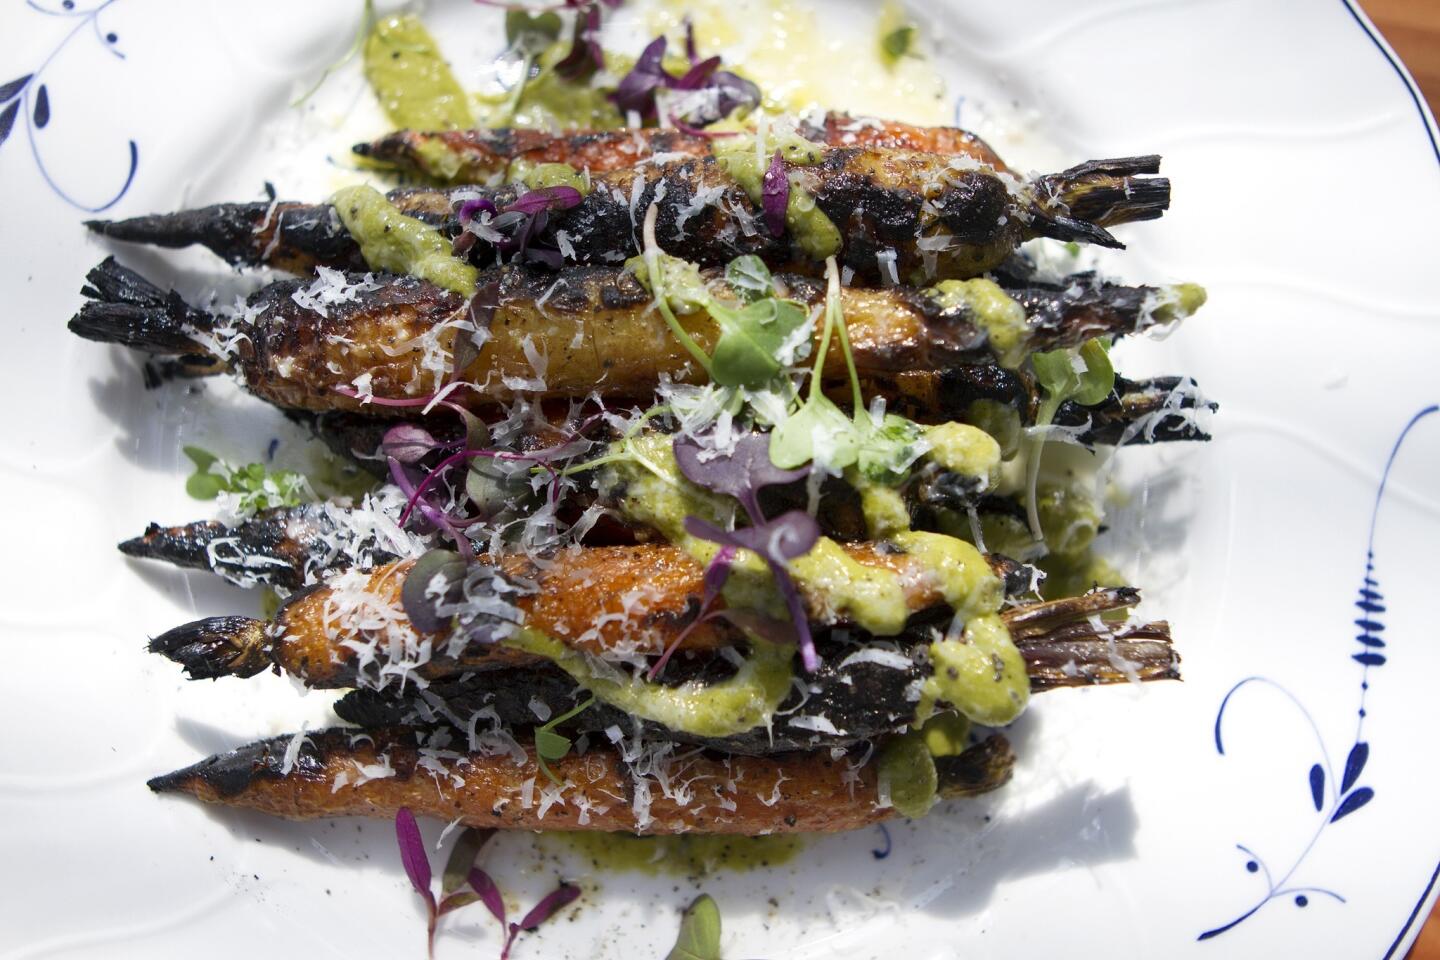 Carrots at the vegetable-focused Commissary are roasted, drizzled with tart yogurt, sprinkled with radish sprouts and served with green sauce. Just point at the picture of a carrot on the menu.